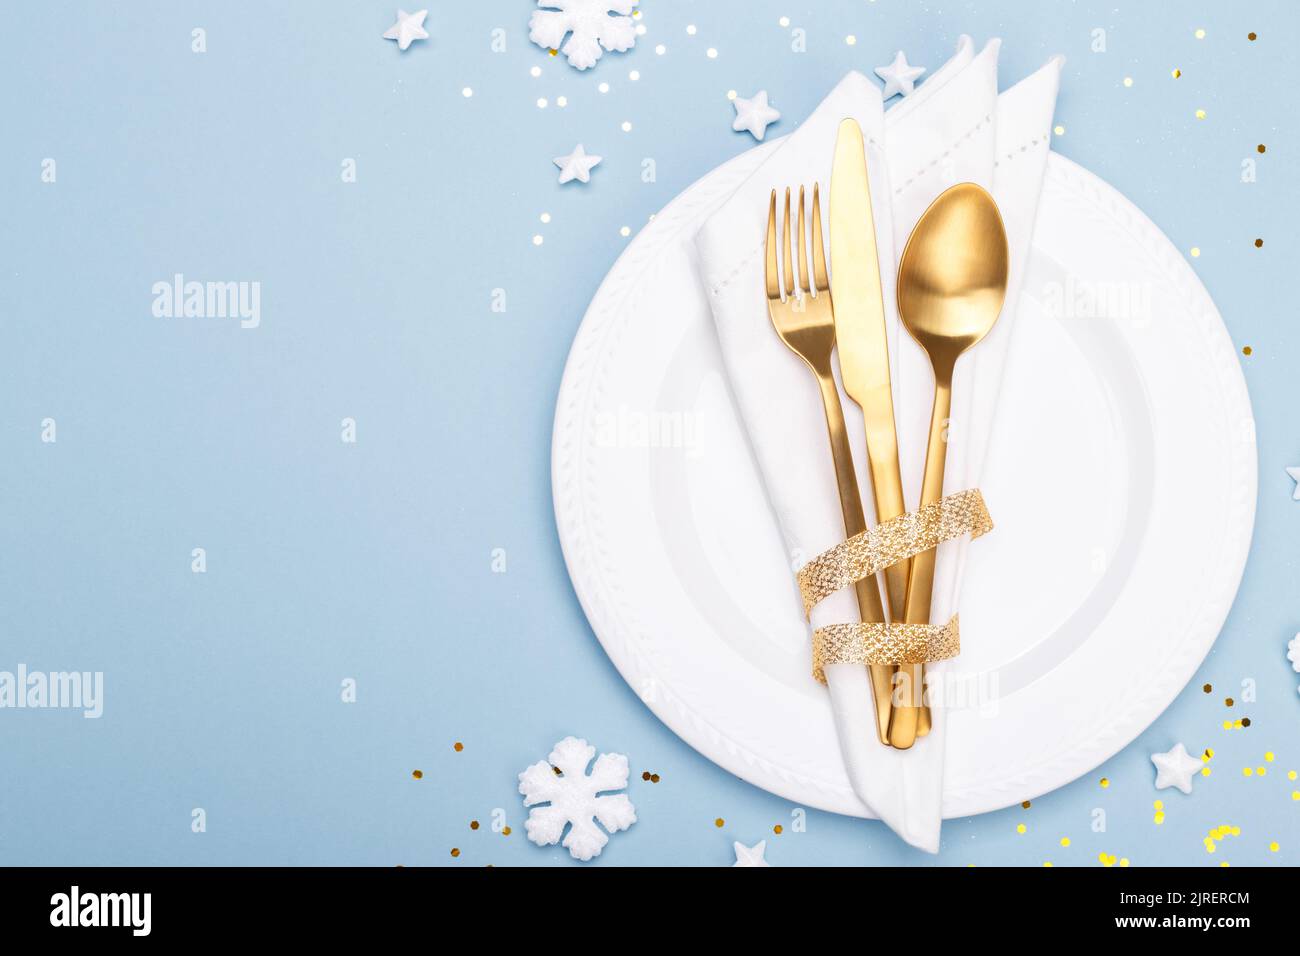 Christmas or new year table setting with golden cutlery on the blue background with copy space Stock Photo